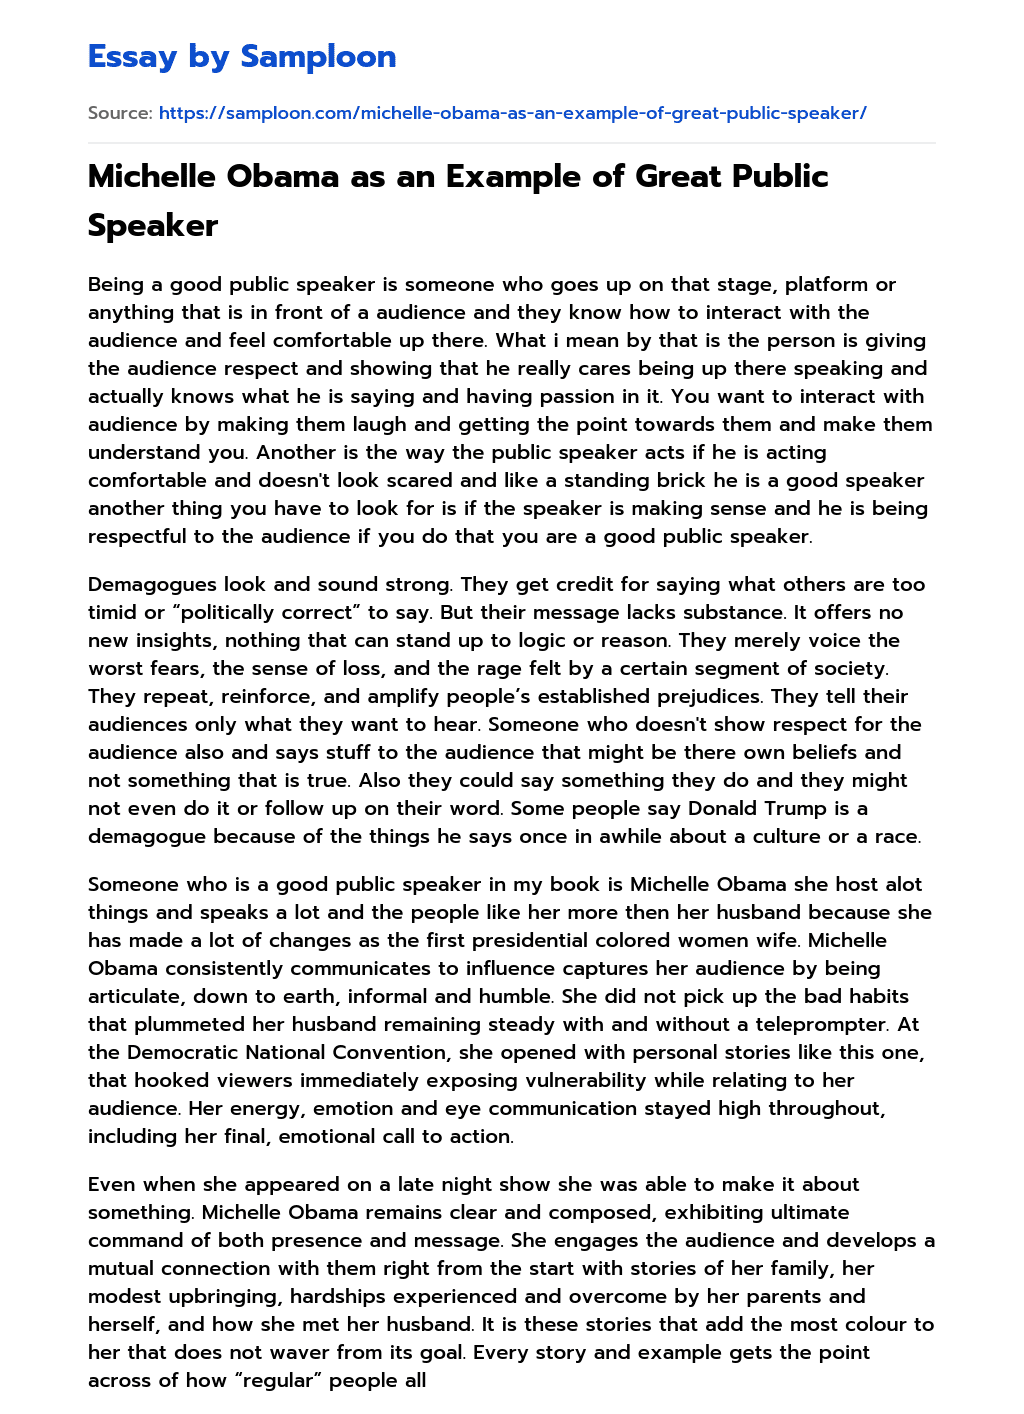 Michelle Obama as an Example of Great Public Speaker essay